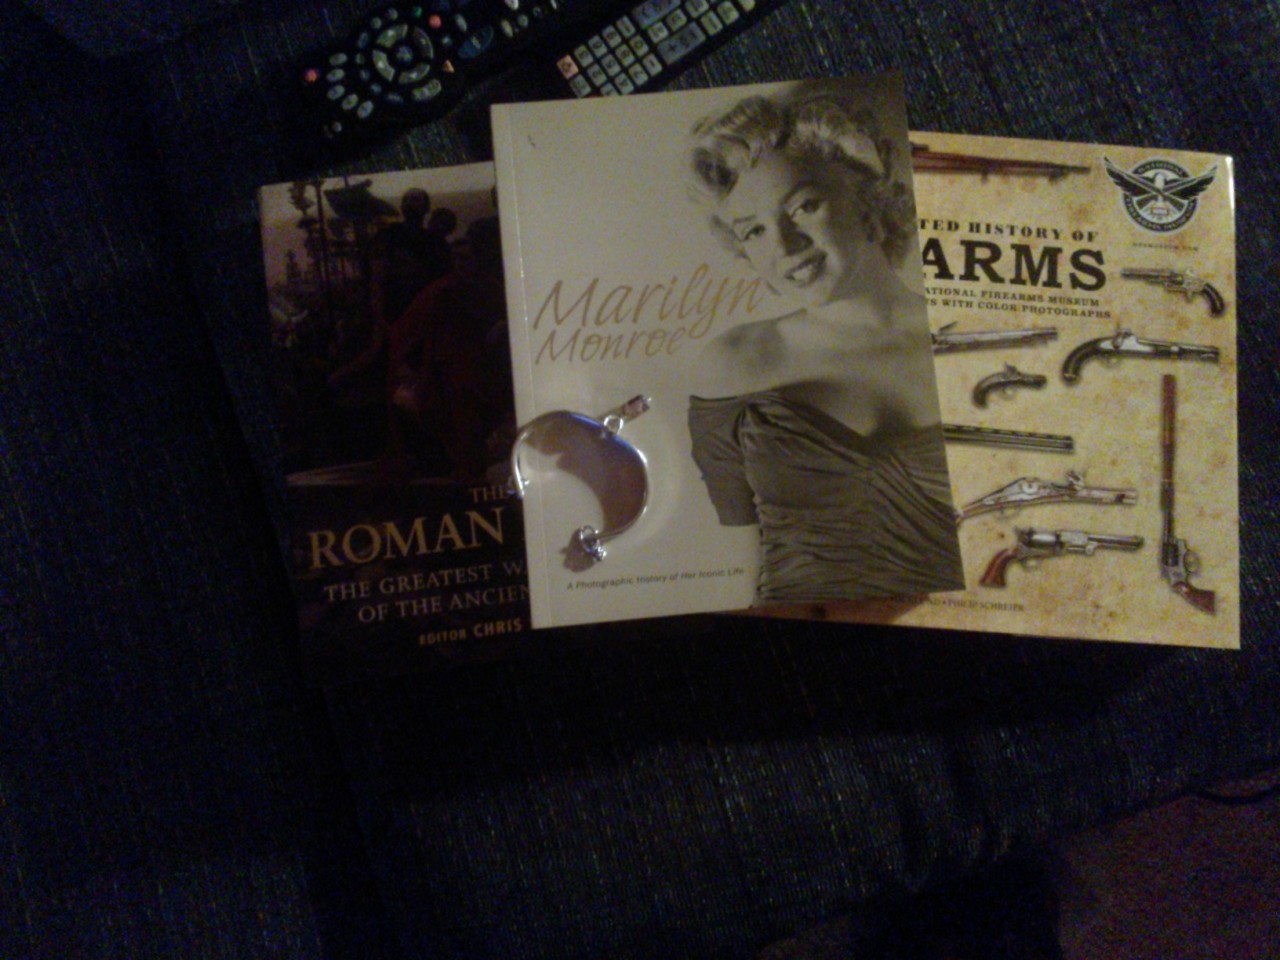 My mother in law knows us too well. She got Nick a book about the Romans, and one